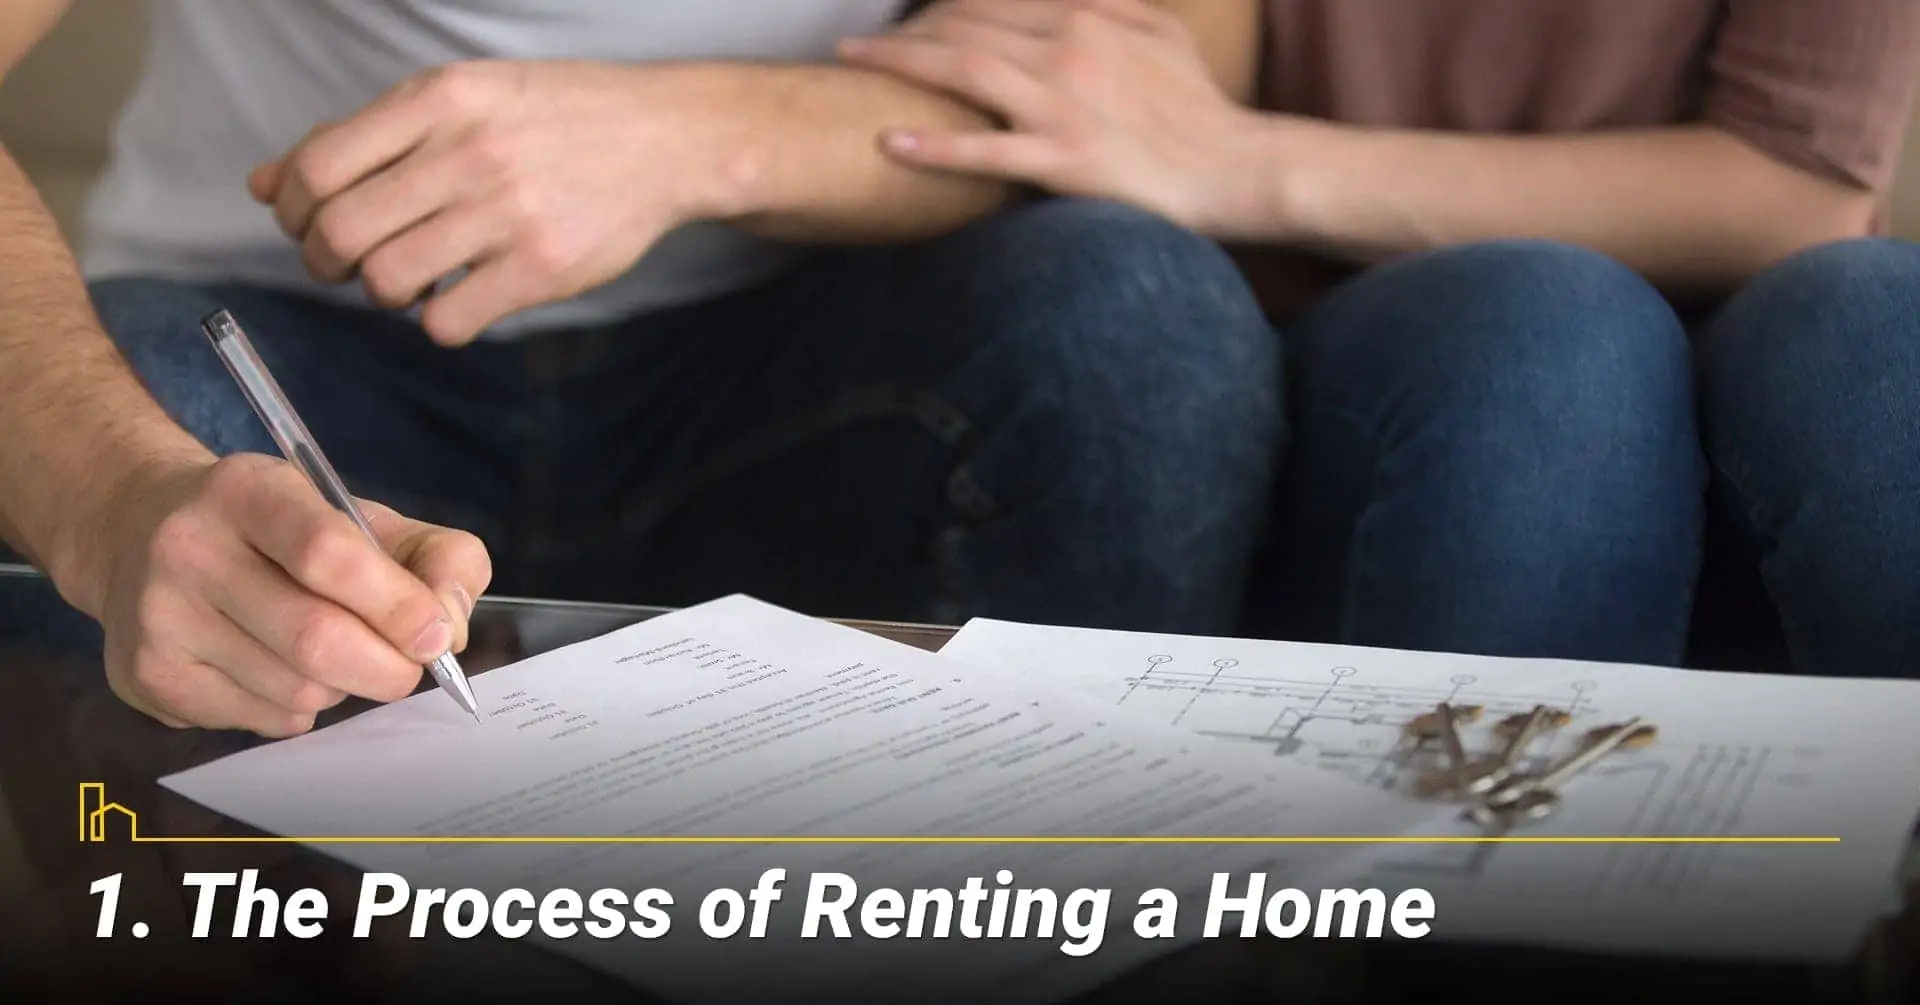 The Process of Renting a Home, steps to rent out your home